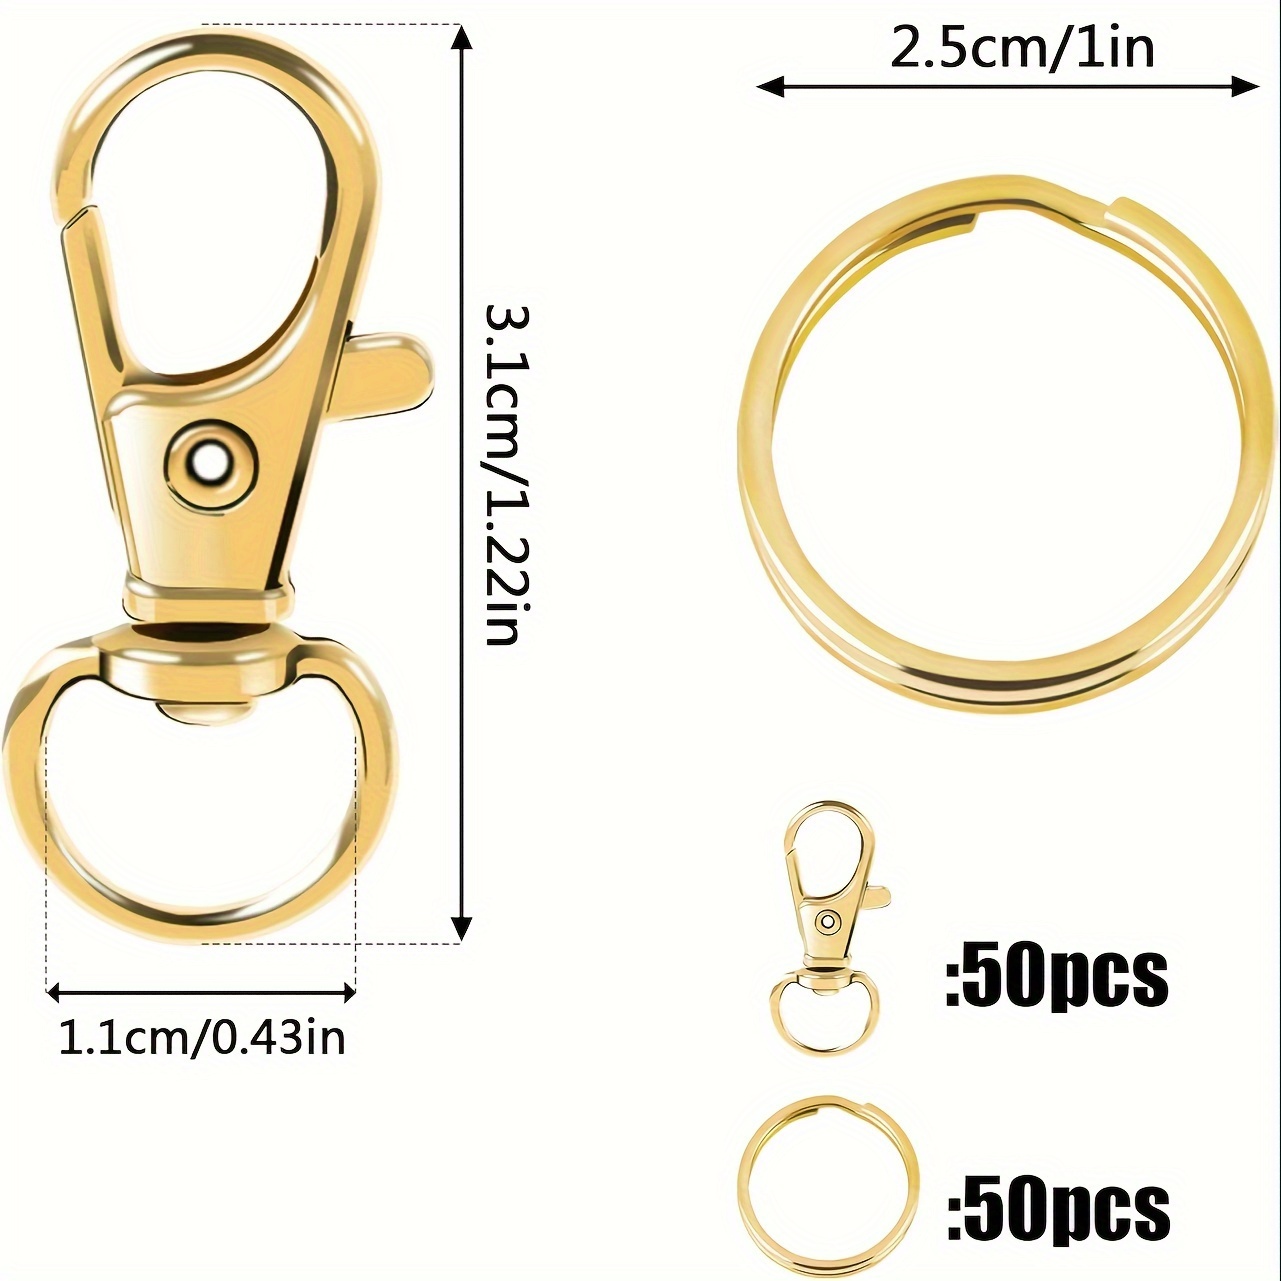 AUGSUN 100pcs Gold Swivel Clasps Lanyard Snap Hooks with Key Rings, Key Chain Clip Hooks Lobster Claw Clasps for Keychains Jewelry DIY Crafts